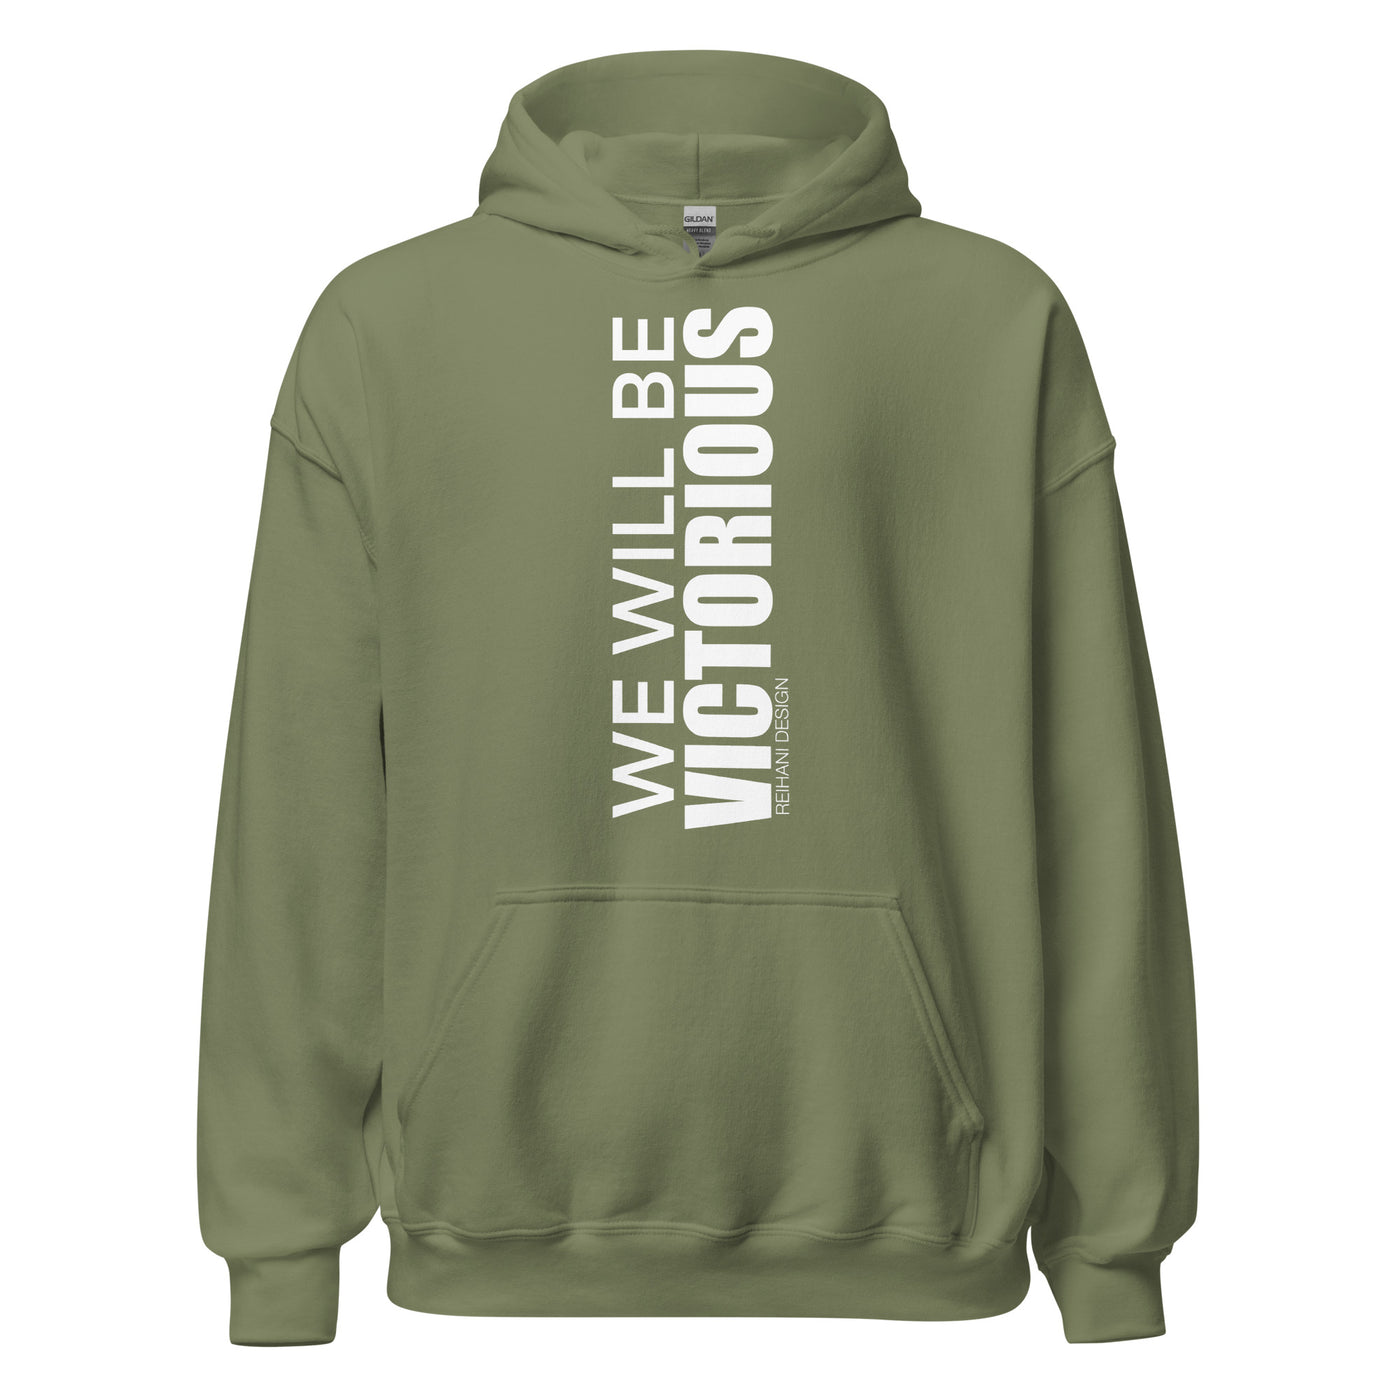 Unisex Hoodie with "WE WILL BE VICTORIOUS" IMPRINT